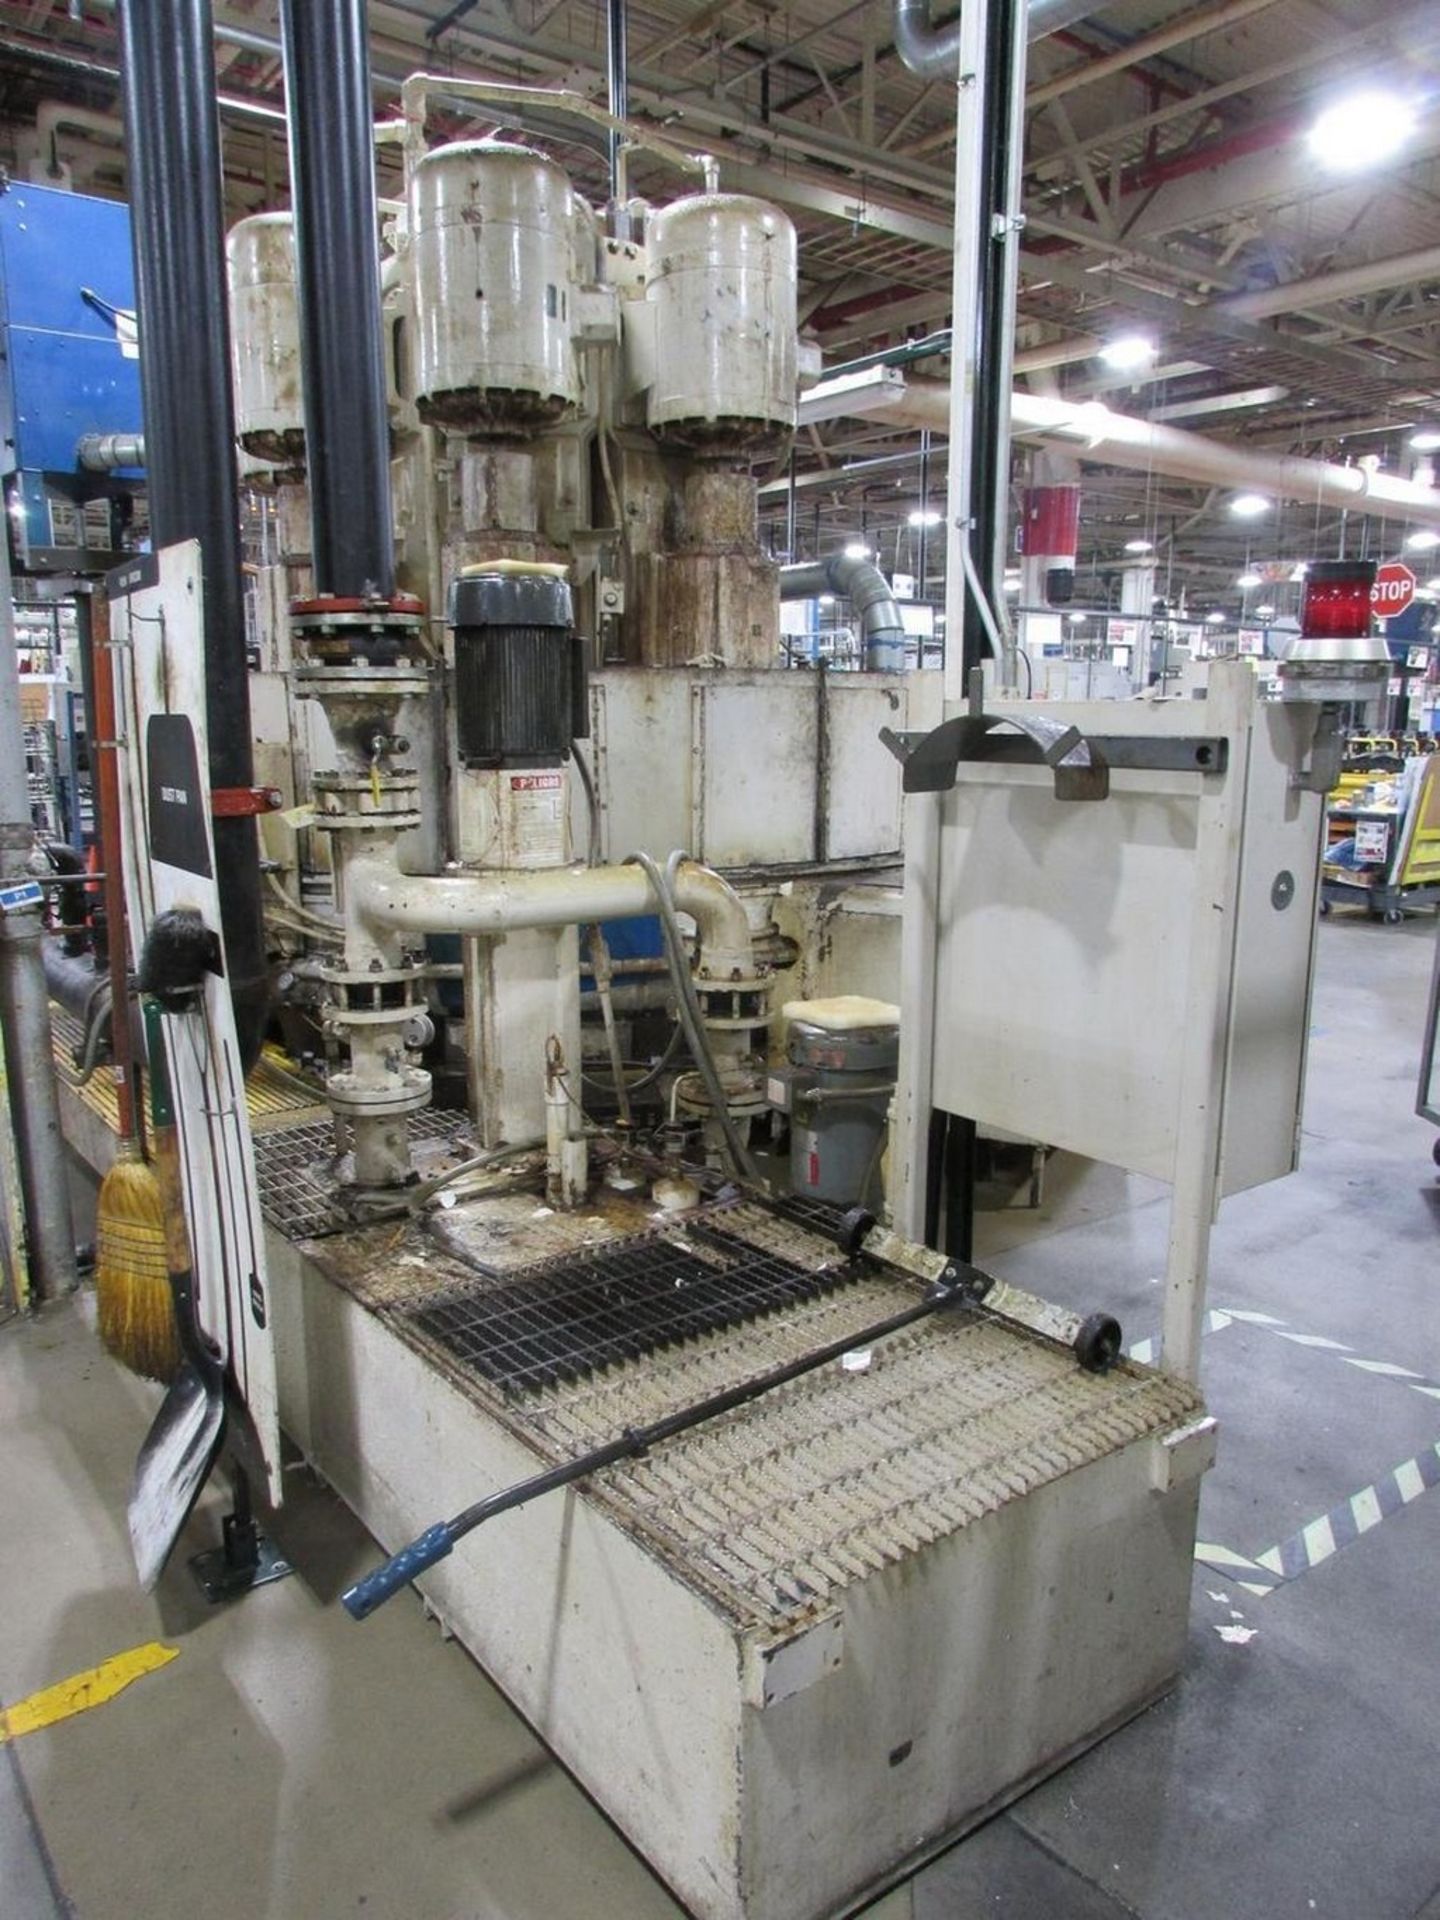 100" Mattison Type 100C 5-Spindle Rotary Surface Grinder - Image 4 of 15